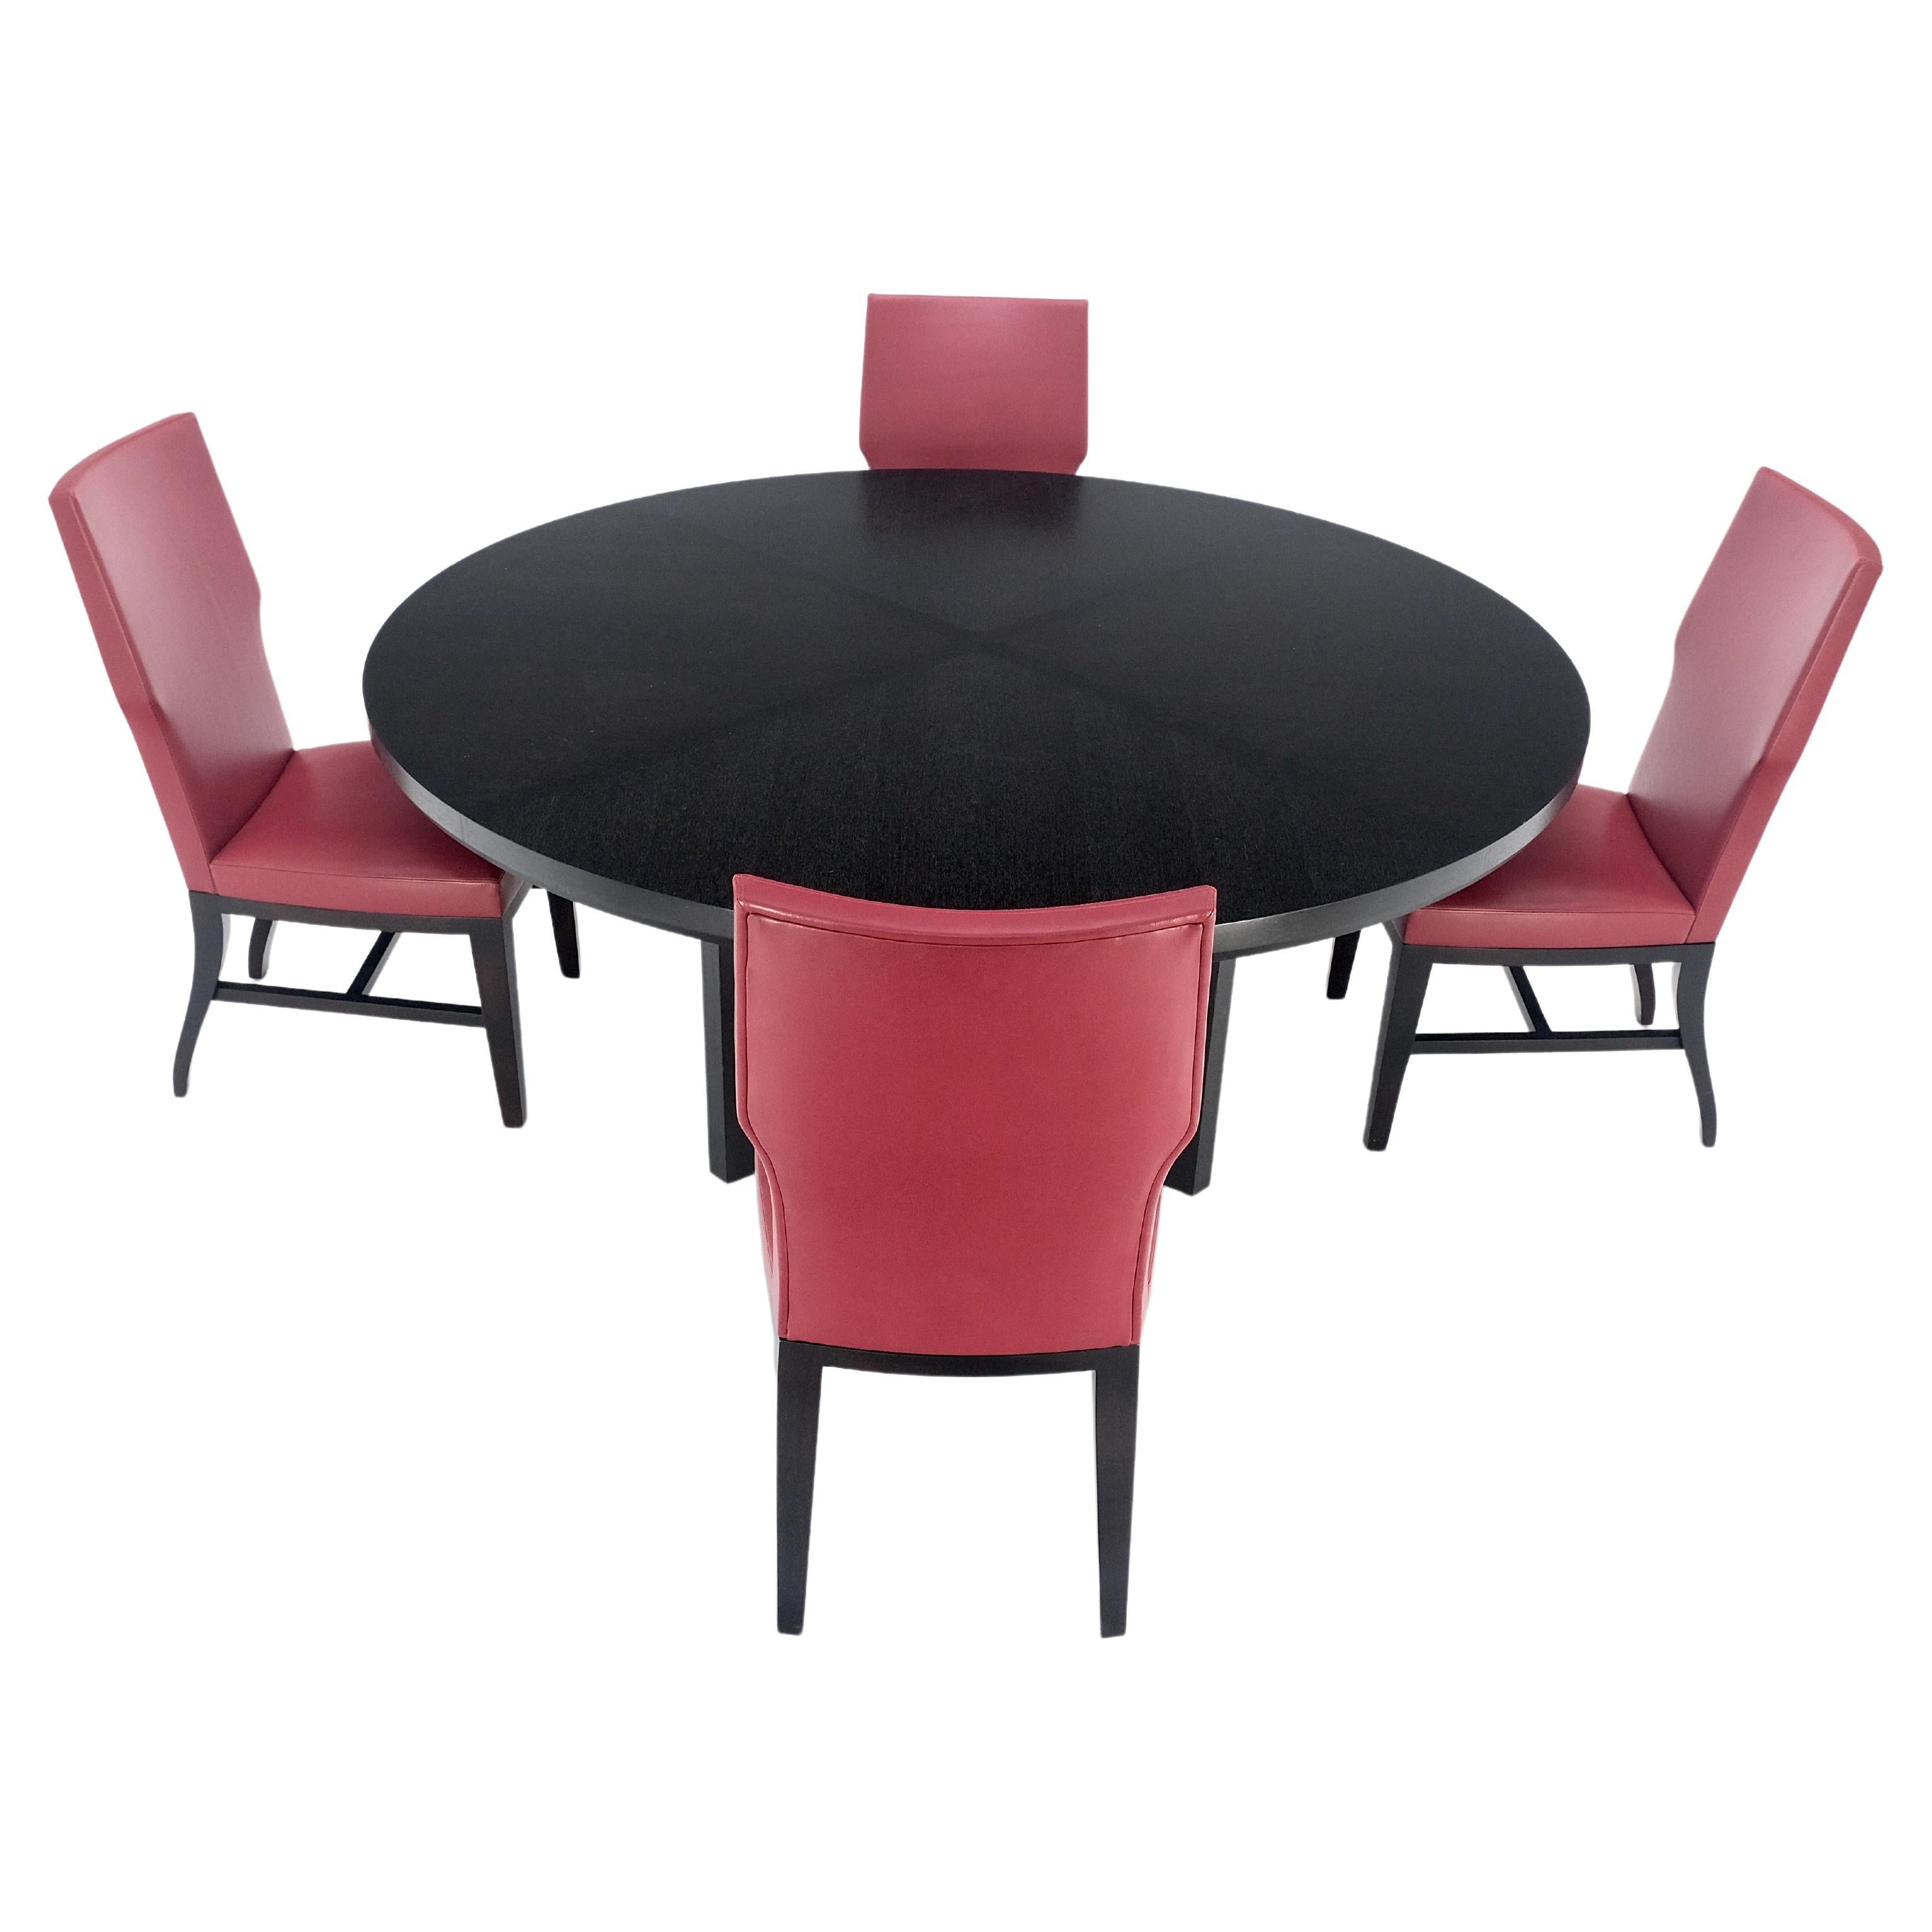 Lacquered Holly Hunt Large 6' Diameter Round Ebonized Table Oak 4 Chairs Dining Set MINT! For Sale